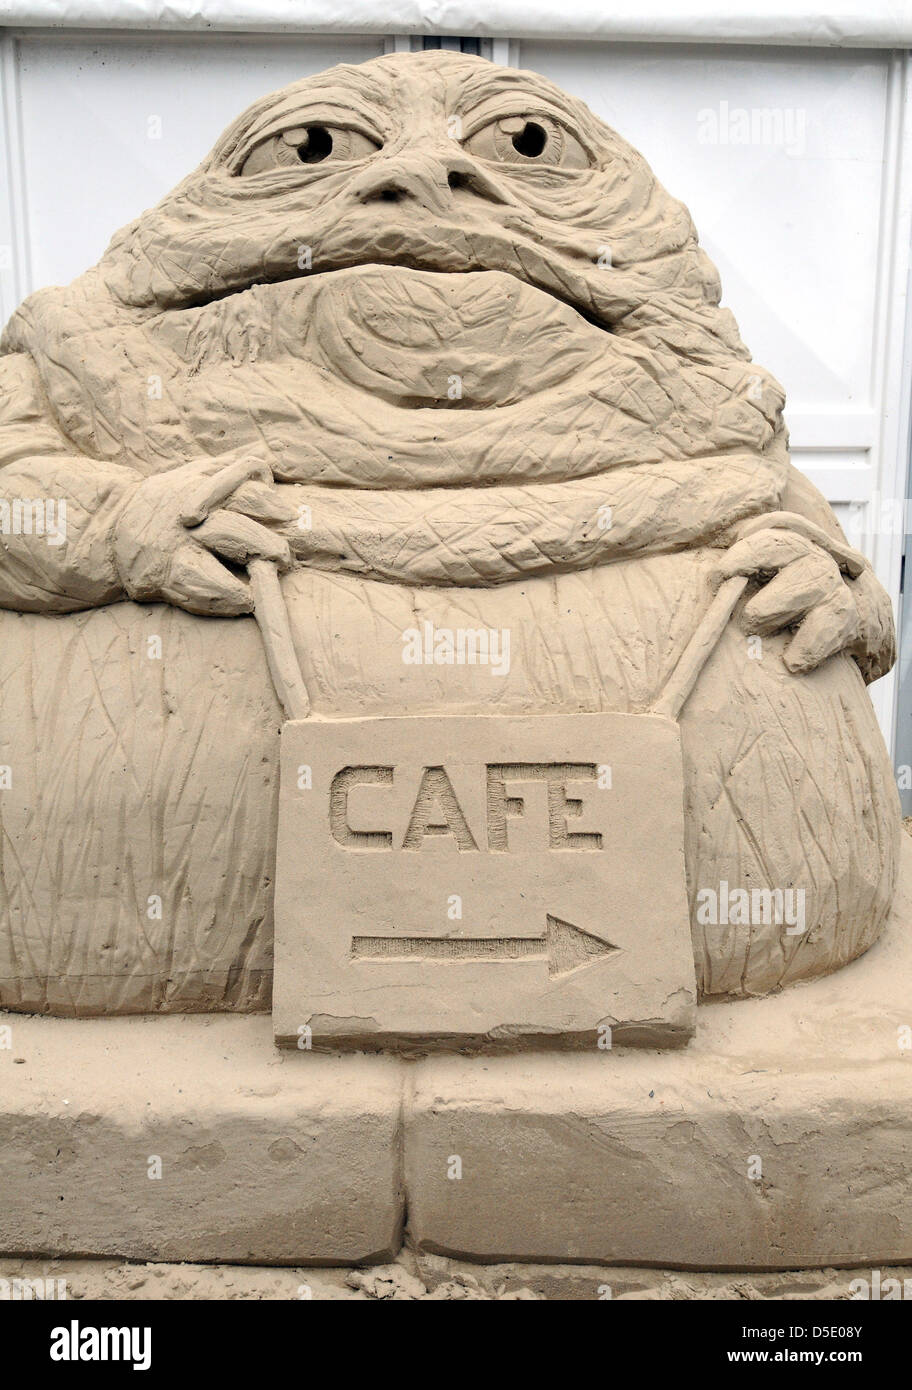 Opening of the world's first science fiction themed sand sculpture exhibition at Sandworld in Weymouth Dorset, Britain. Stock Photo